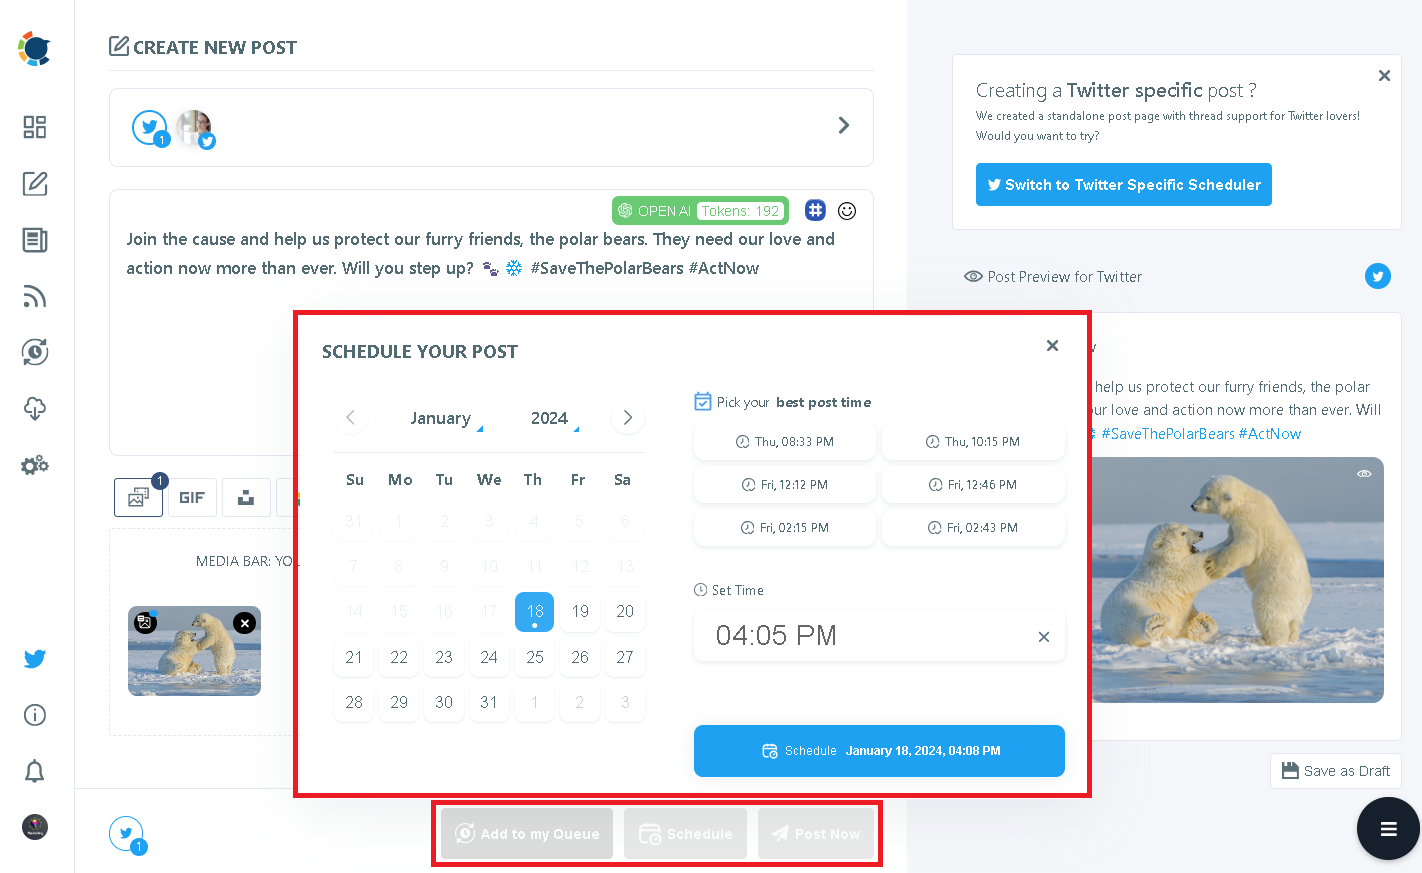 You can schedule your tweets with alt text via Circleboom.